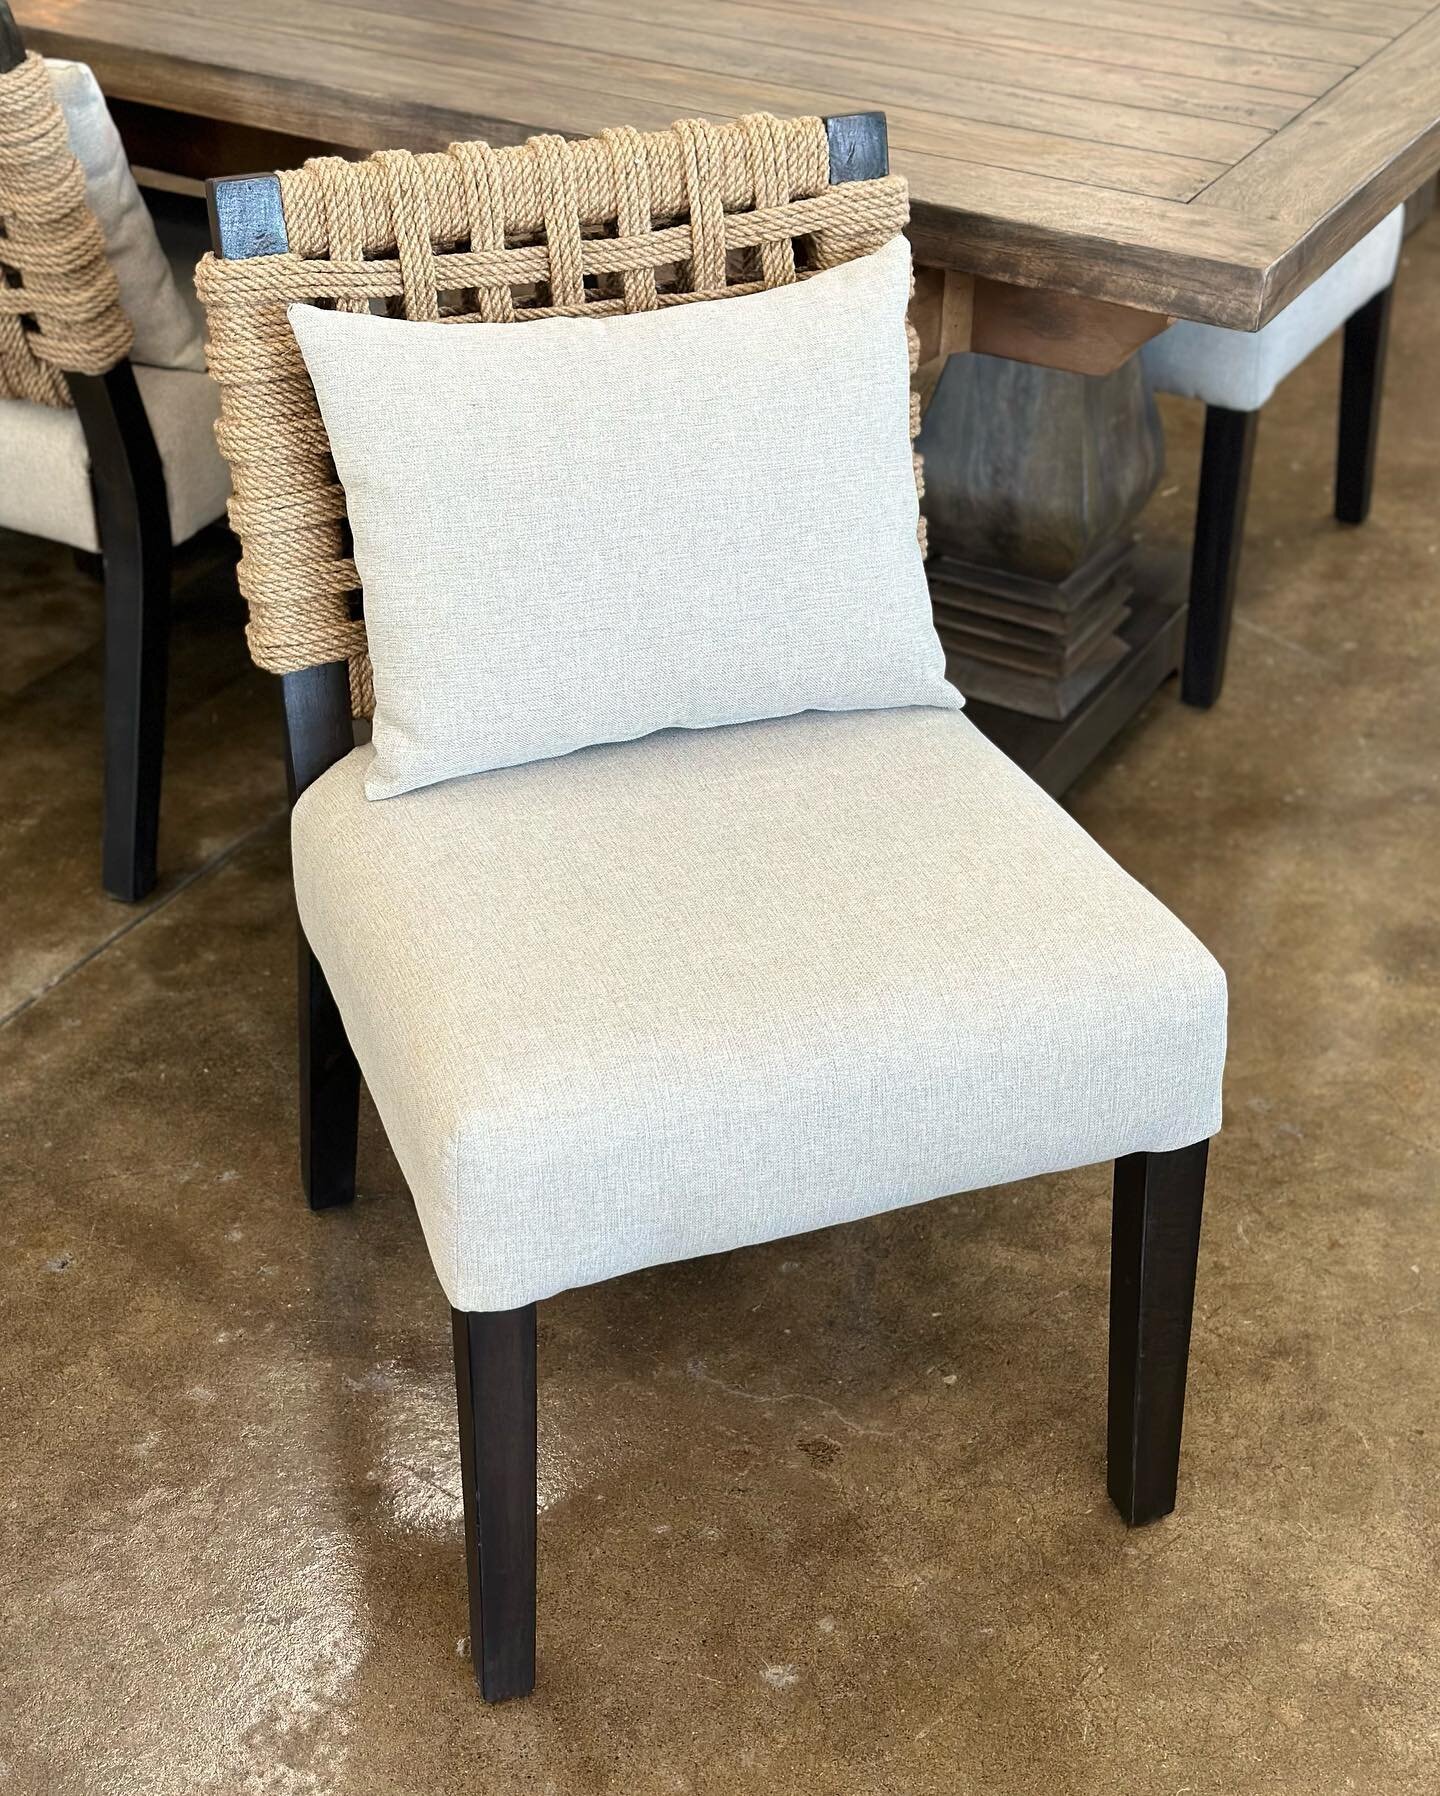 A moment for our new Maya chairs &amp; counter stools. Designed exclusively for Southern Sky. ✨

This chair was created to be the &ldquo;whole package&rdquo; &mdash; comfortable, timeless, &amp; durable. Our favorite attribute might just be the gorge